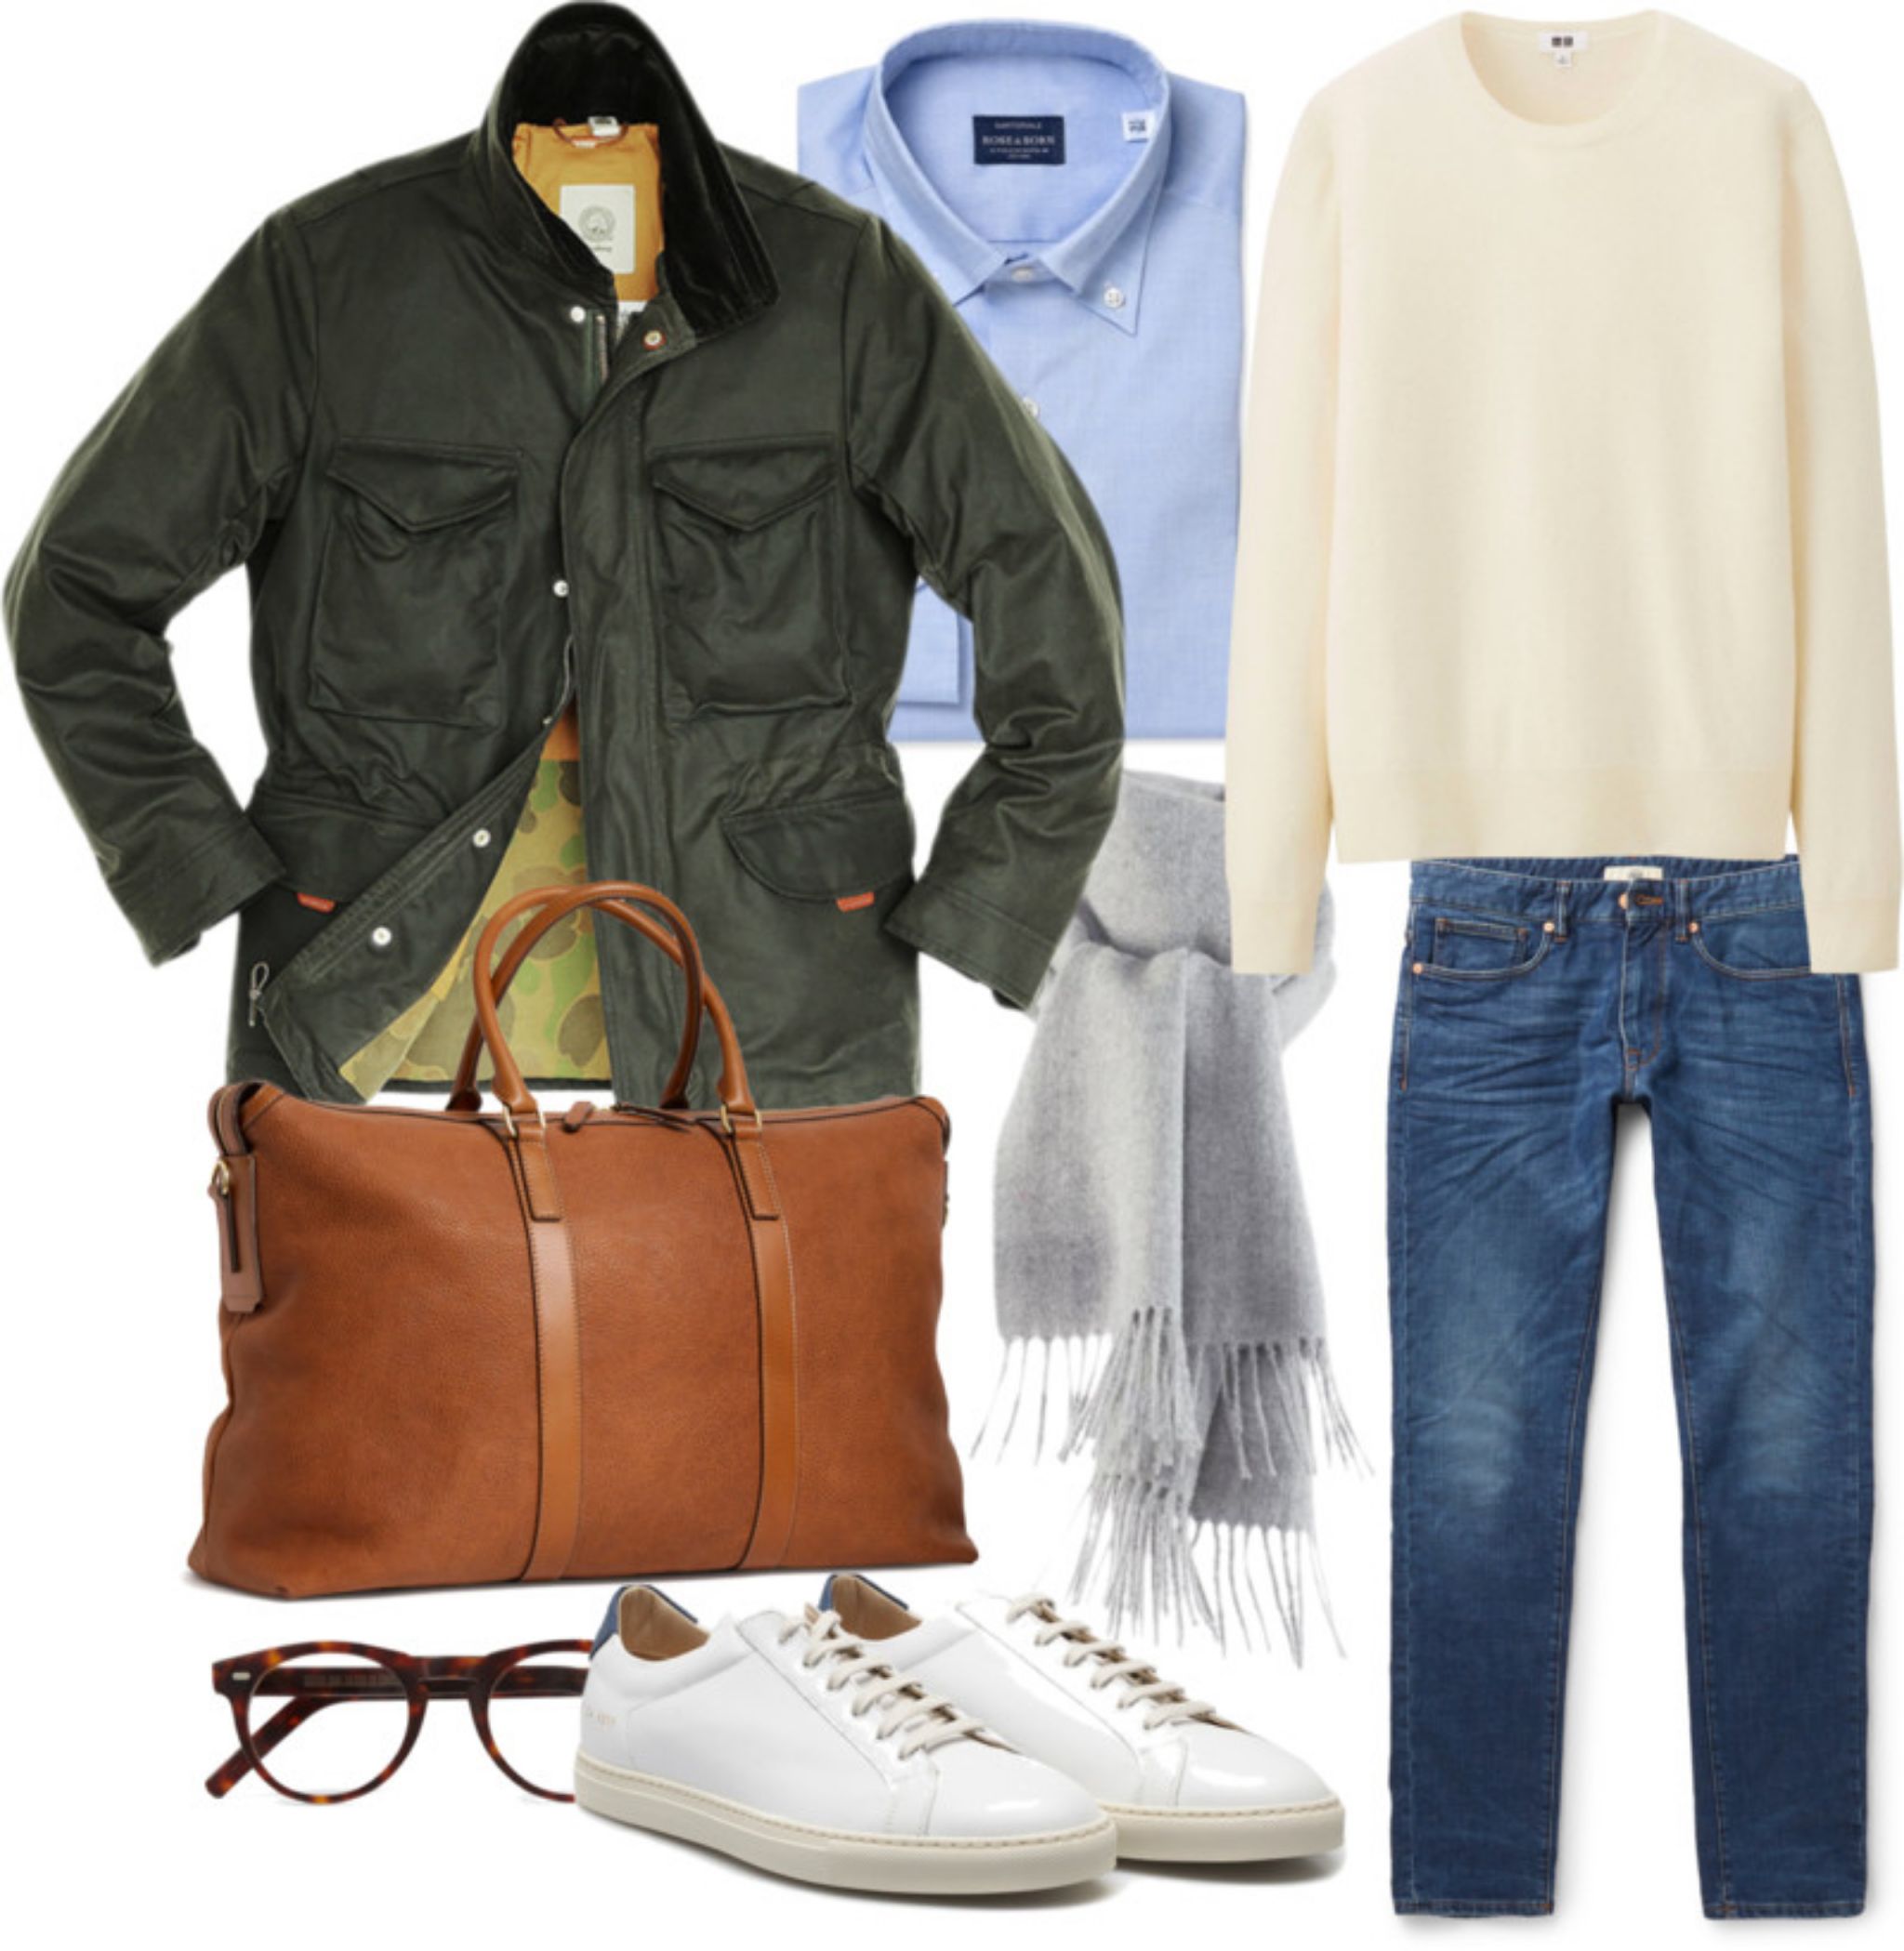 Outfit for casual weekend - cashmere knitwear with denim and field jacket